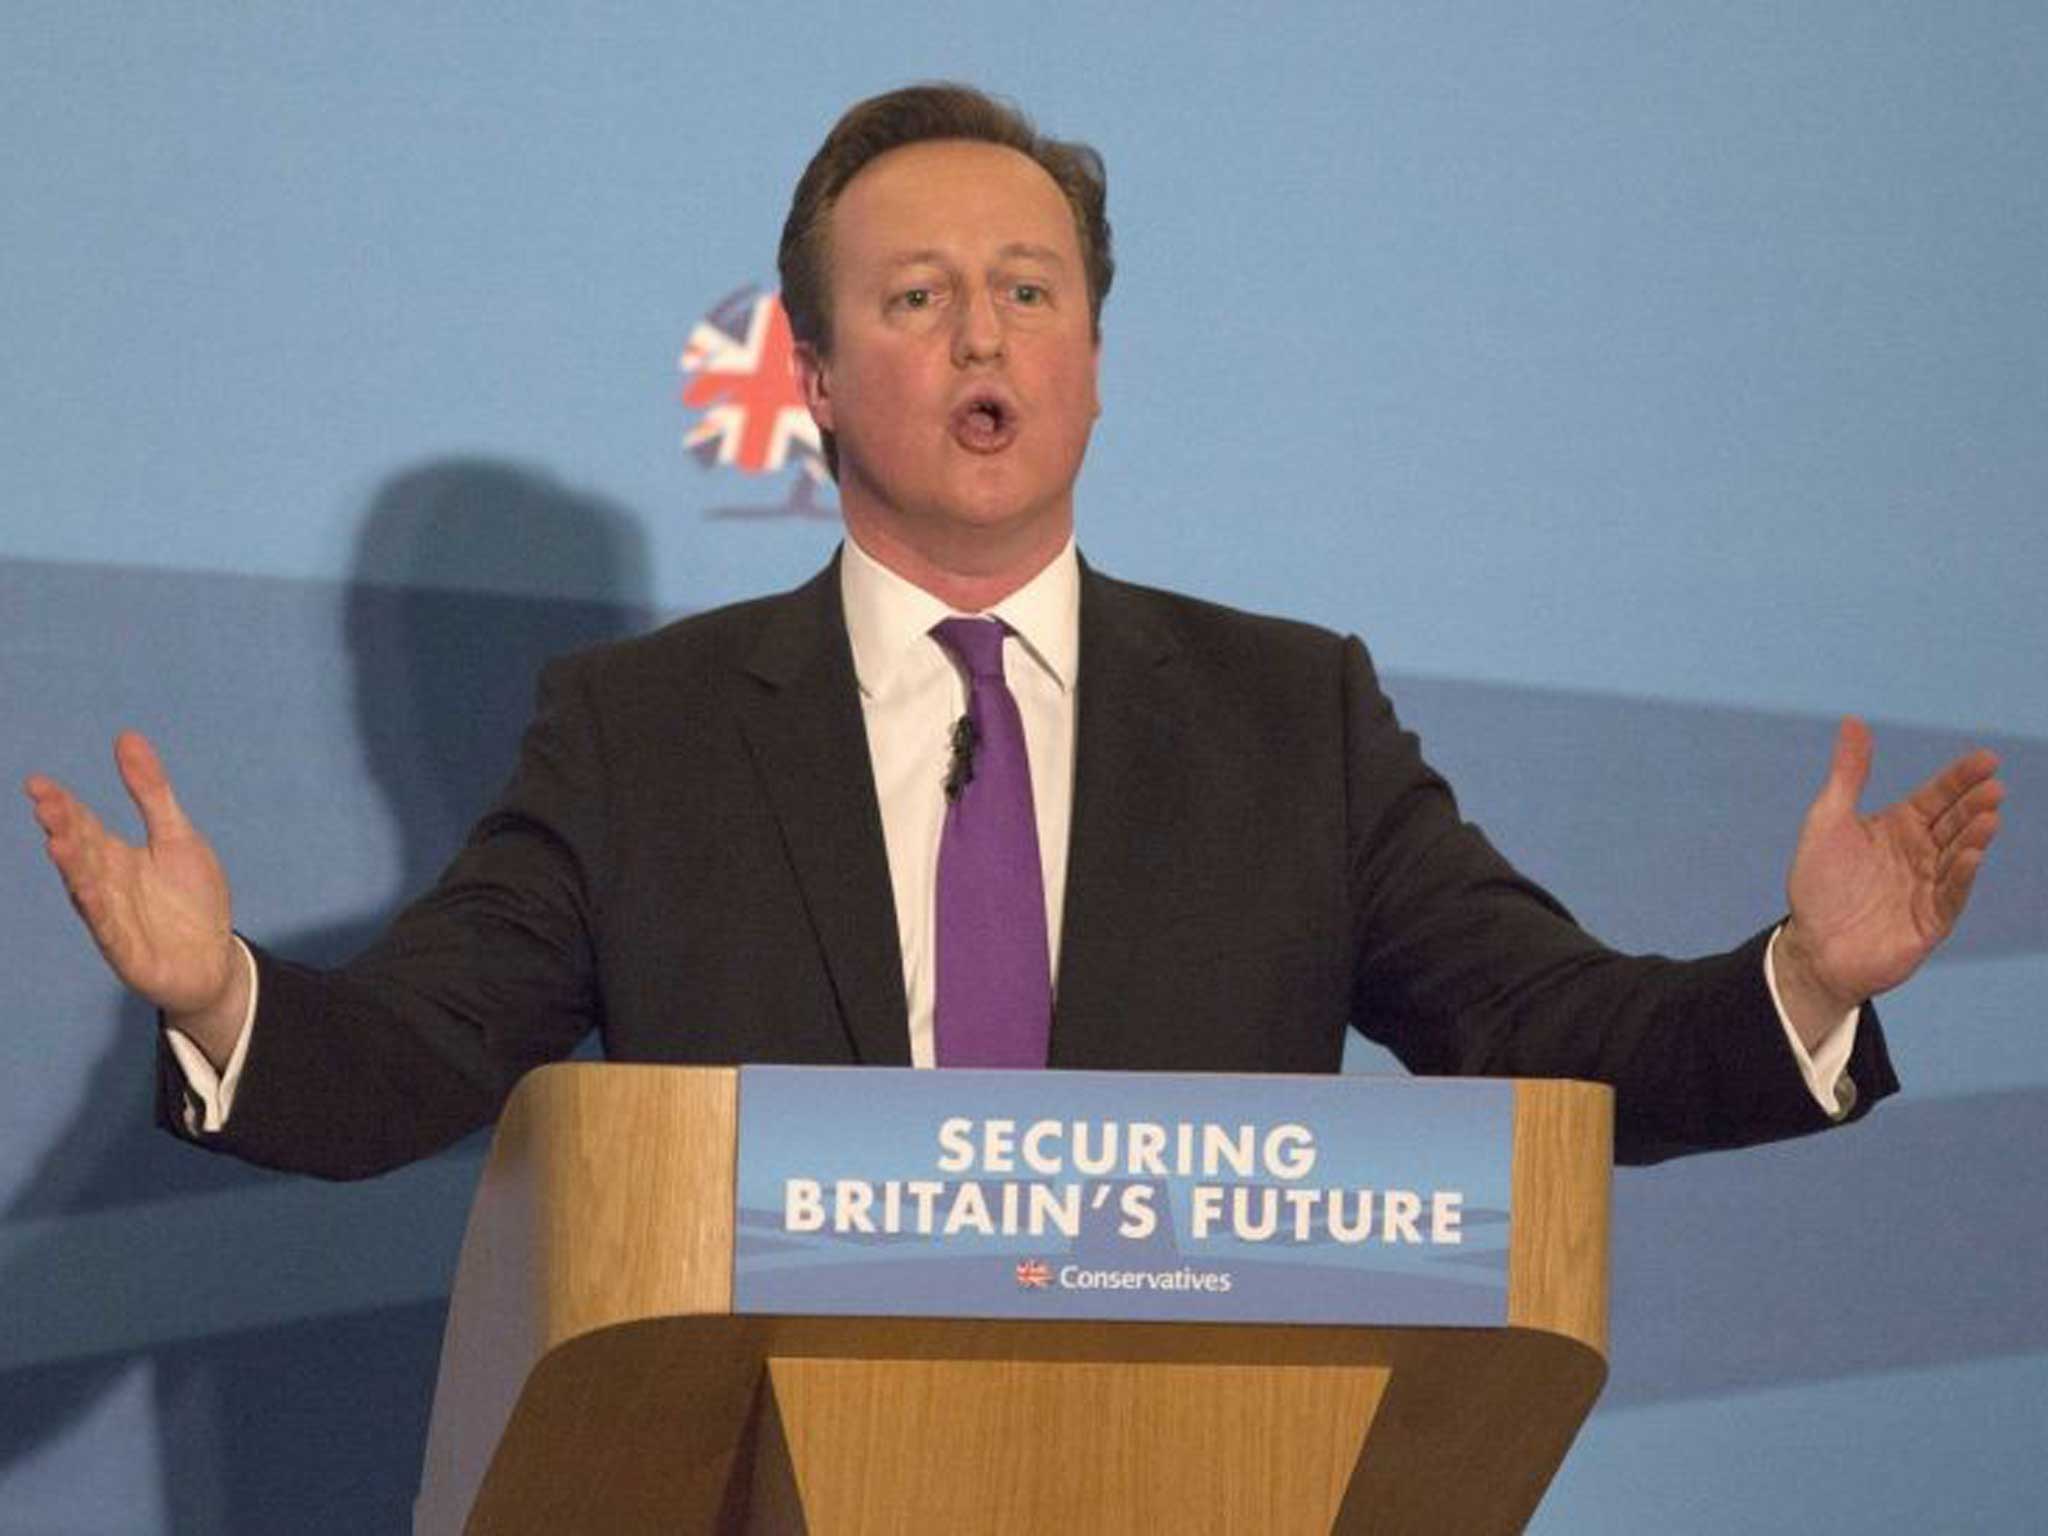 David Cameron said that Ukip was not the party to change anything in Europe